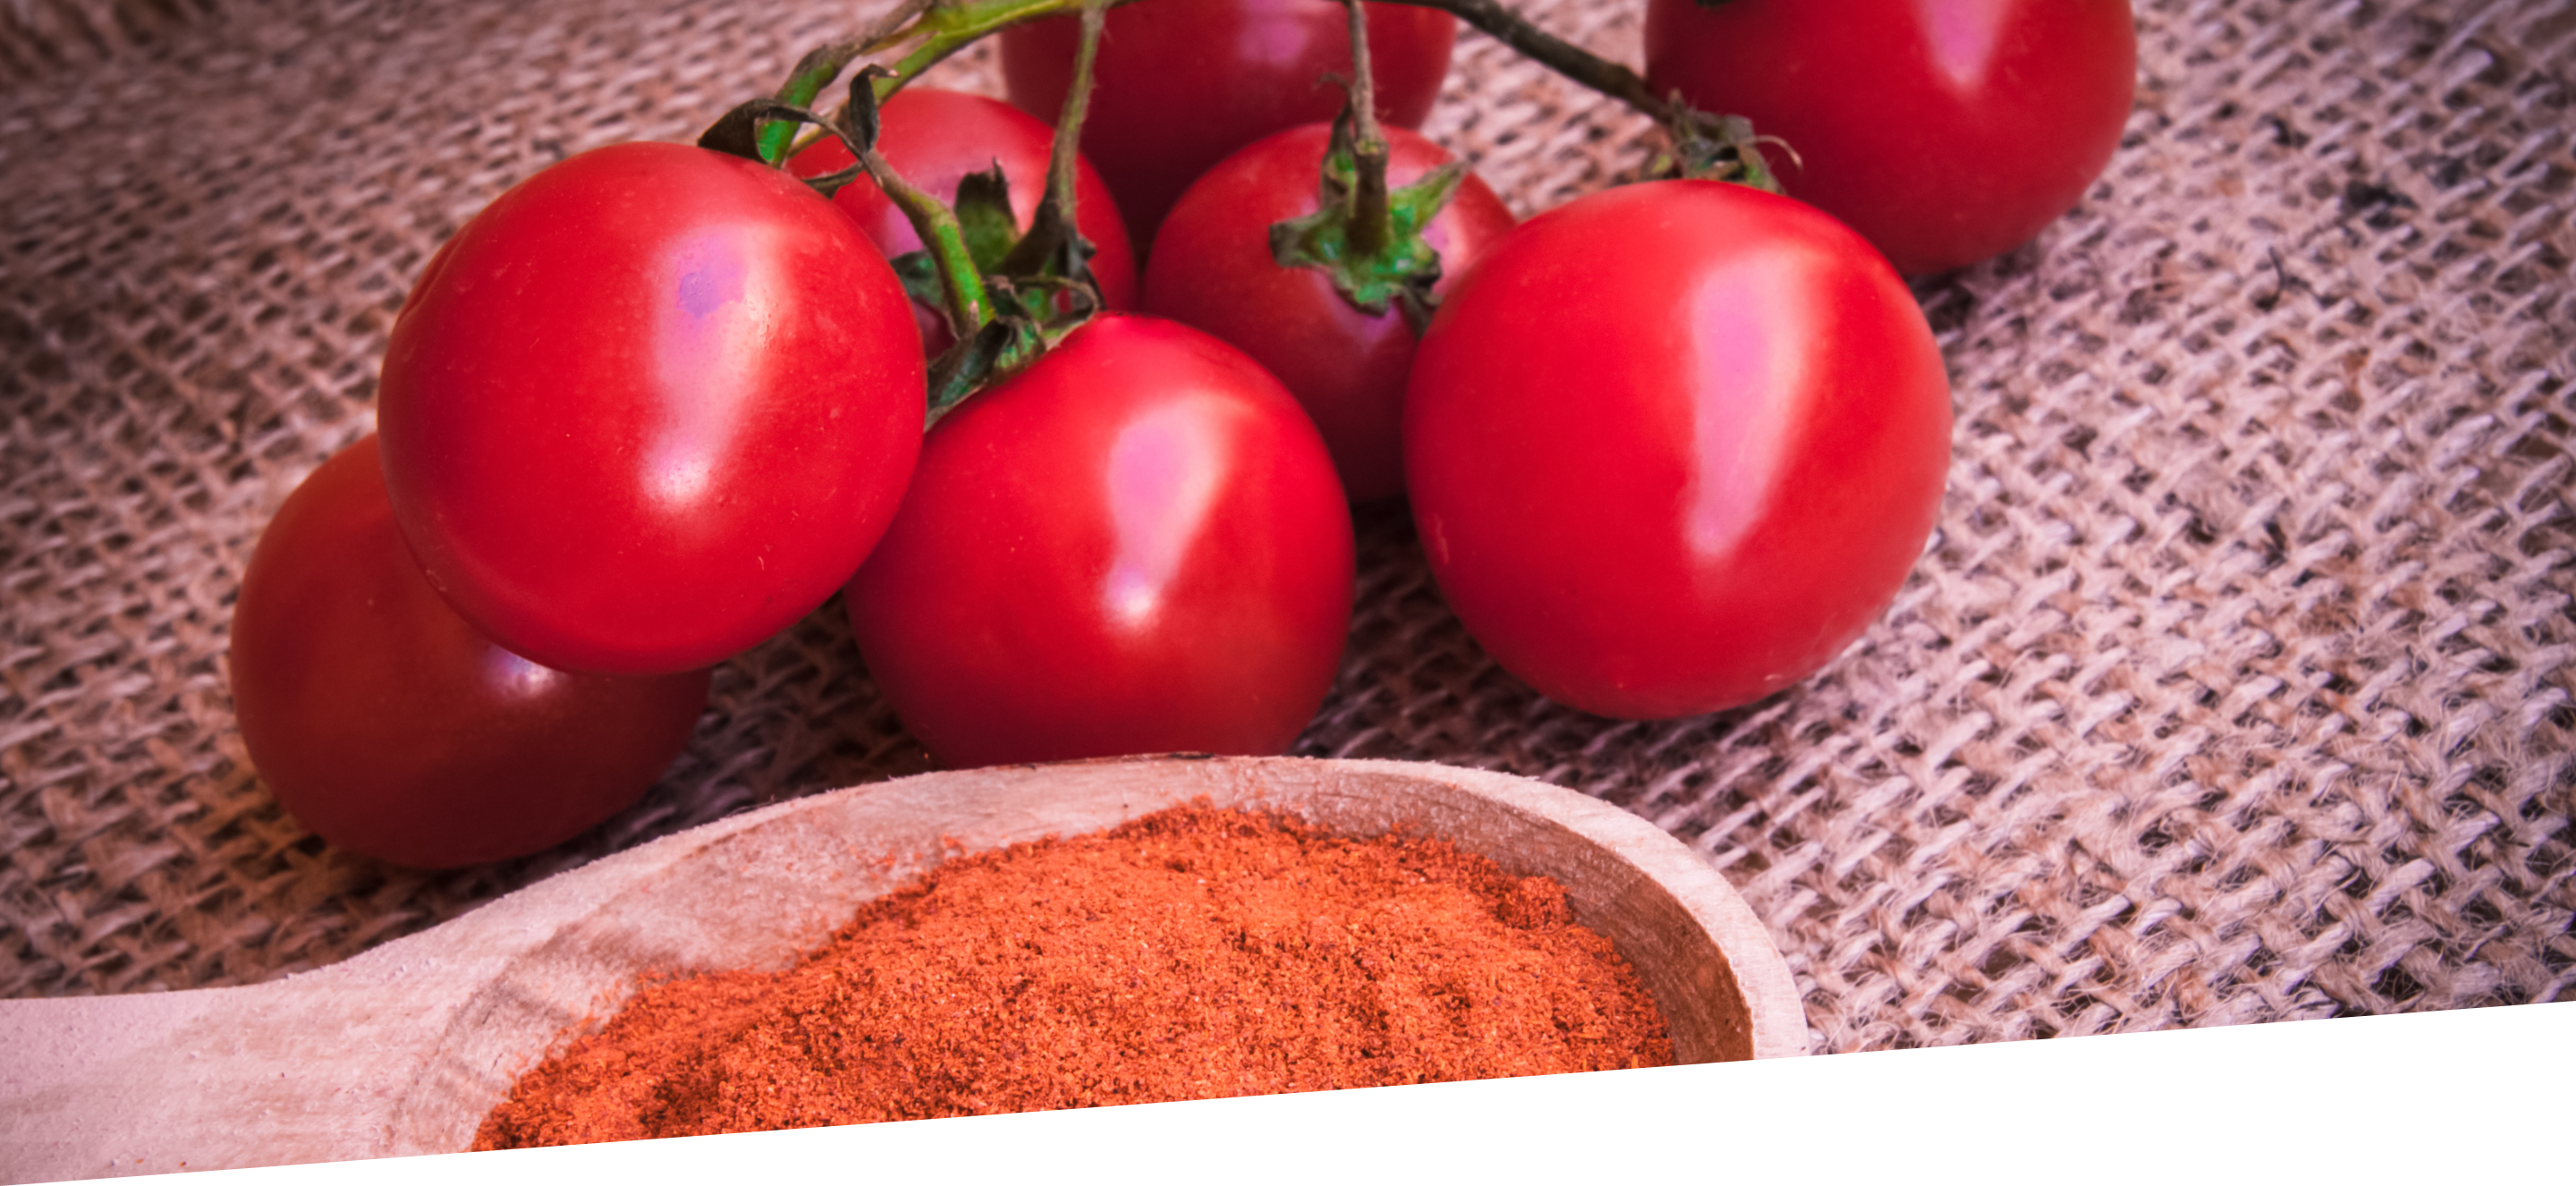 Sayaji Spray Drying - Tomato Powder Manufacturer and Supplier in Ahmedabad, India